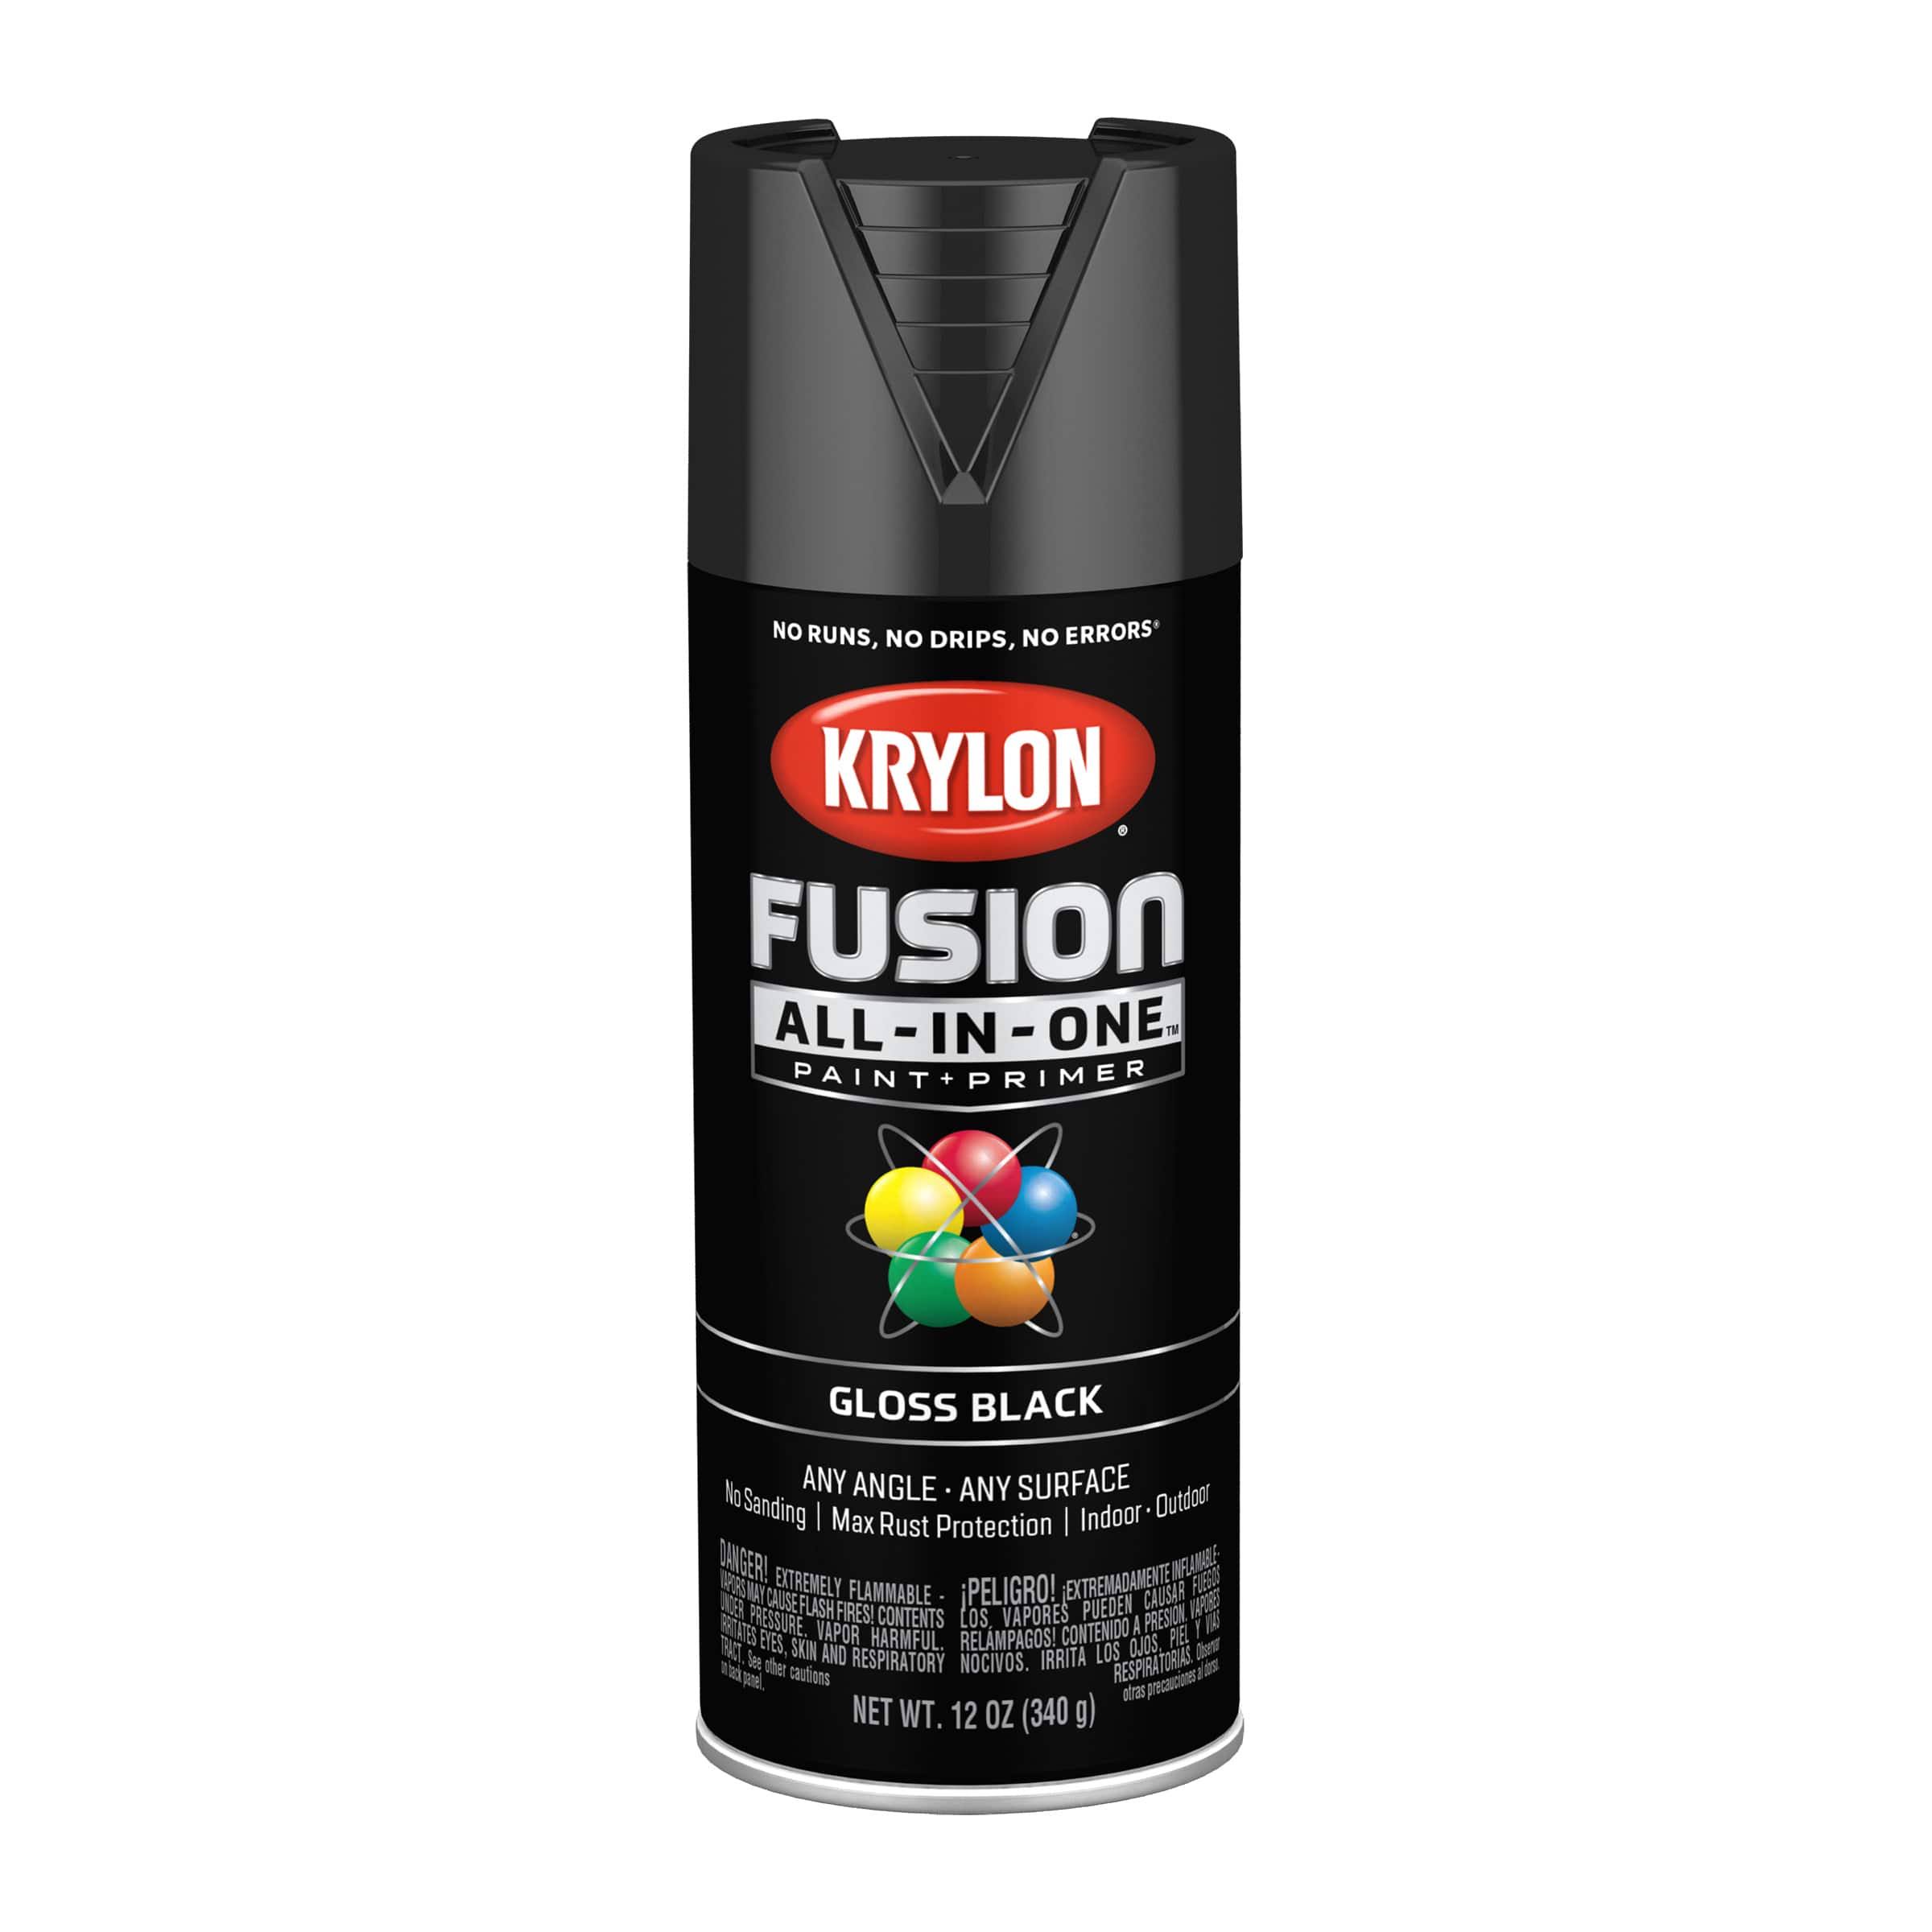 Krylon K02702007 Fusion All-in-One Spray Paint For Indoor/Outdoor Use, Gloss Black , 12 Ounce (Pack of 1)